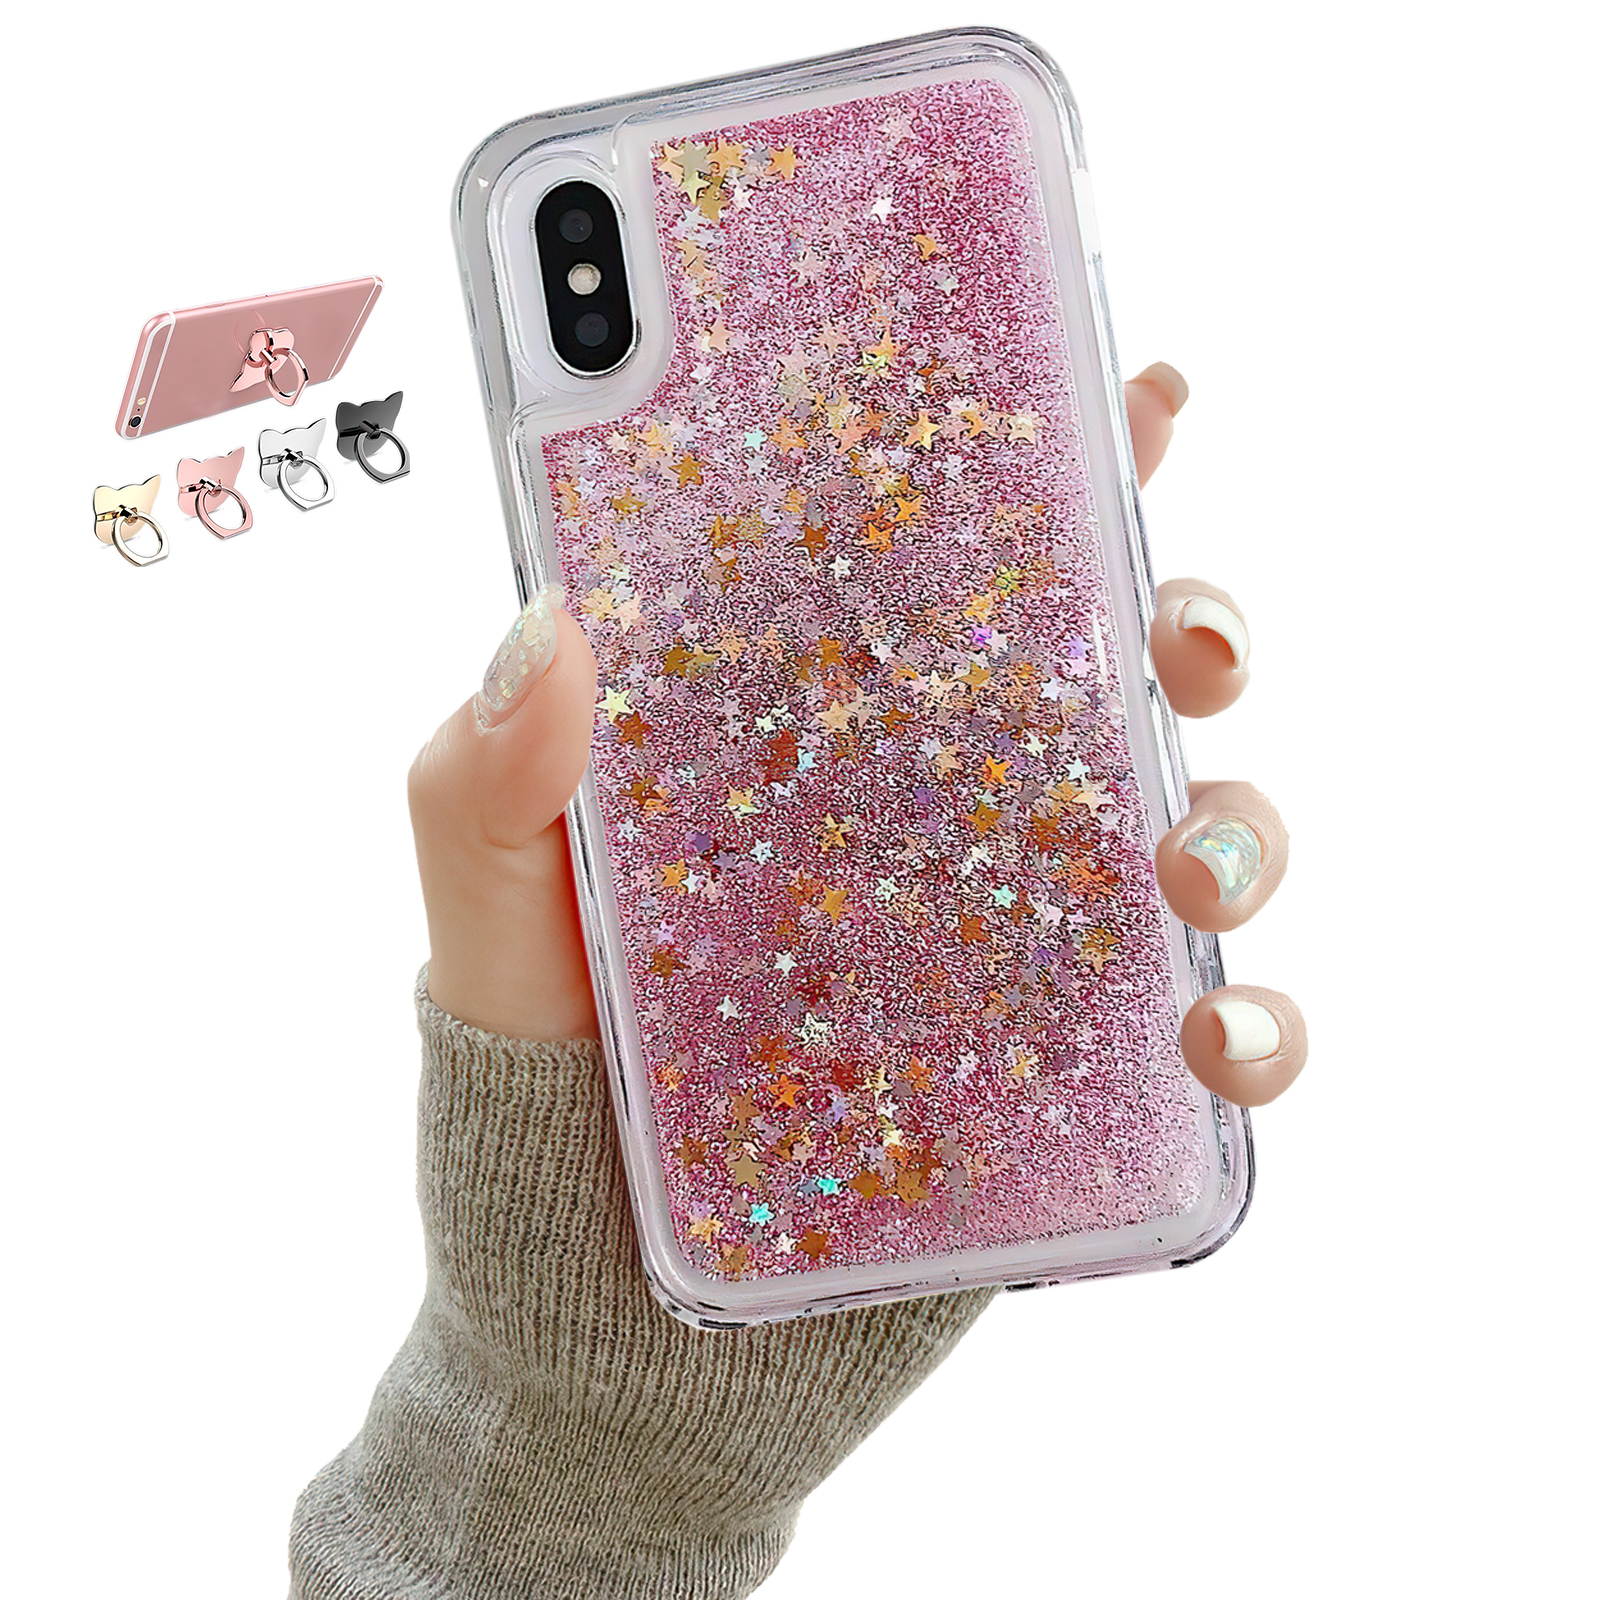 iPhone X/Xs - Moving Glitter 3D Bling Phone Case